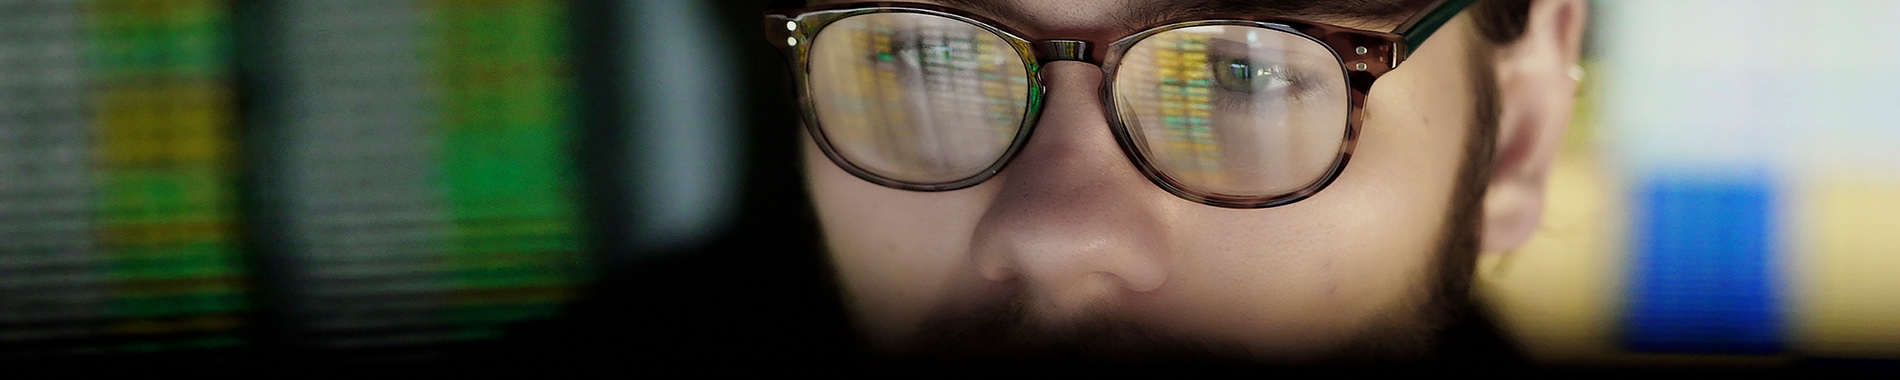 computer screen reflected in man's glasses